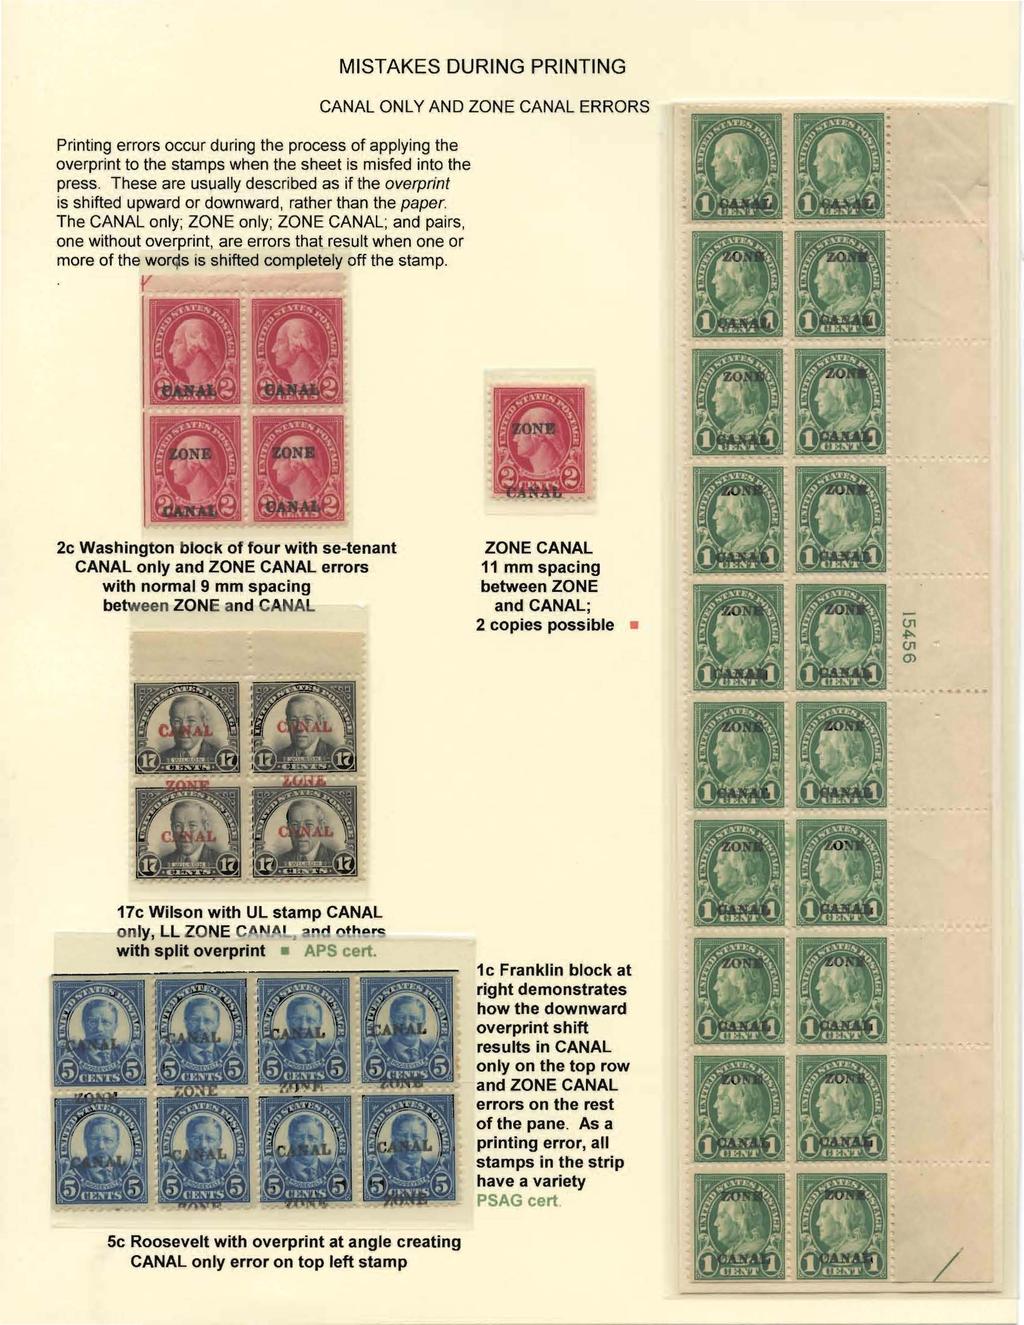 Printing errors occur during the process of applying the overprint to the stamps when the sheet is misfed into the press.